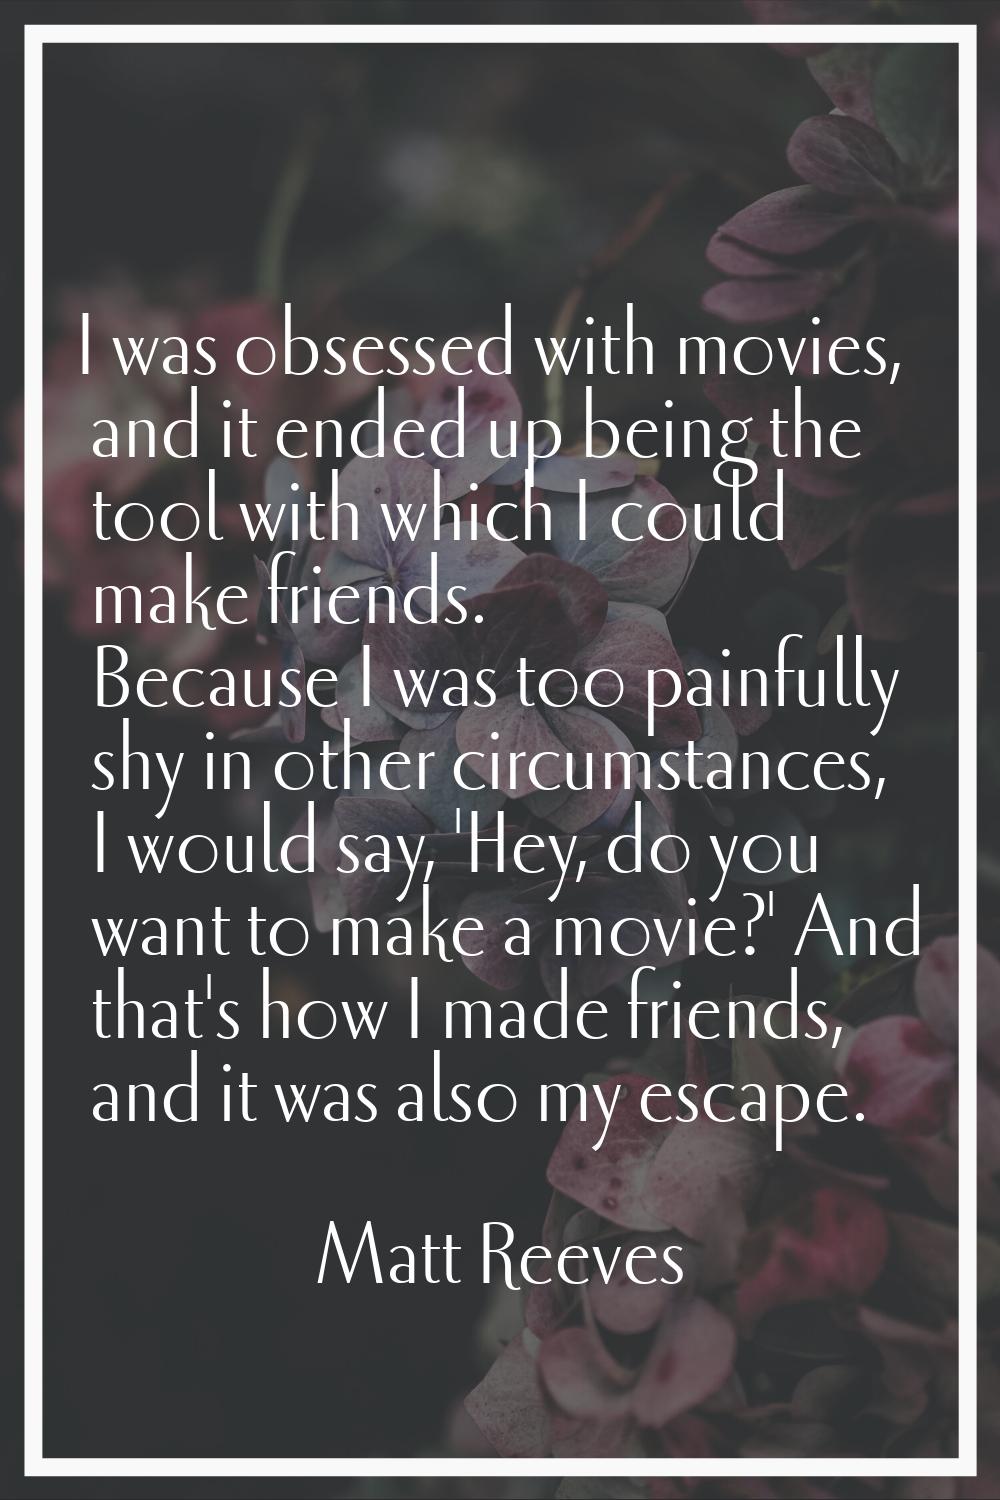 I was obsessed with movies, and it ended up being the tool with which I could make friends. Because